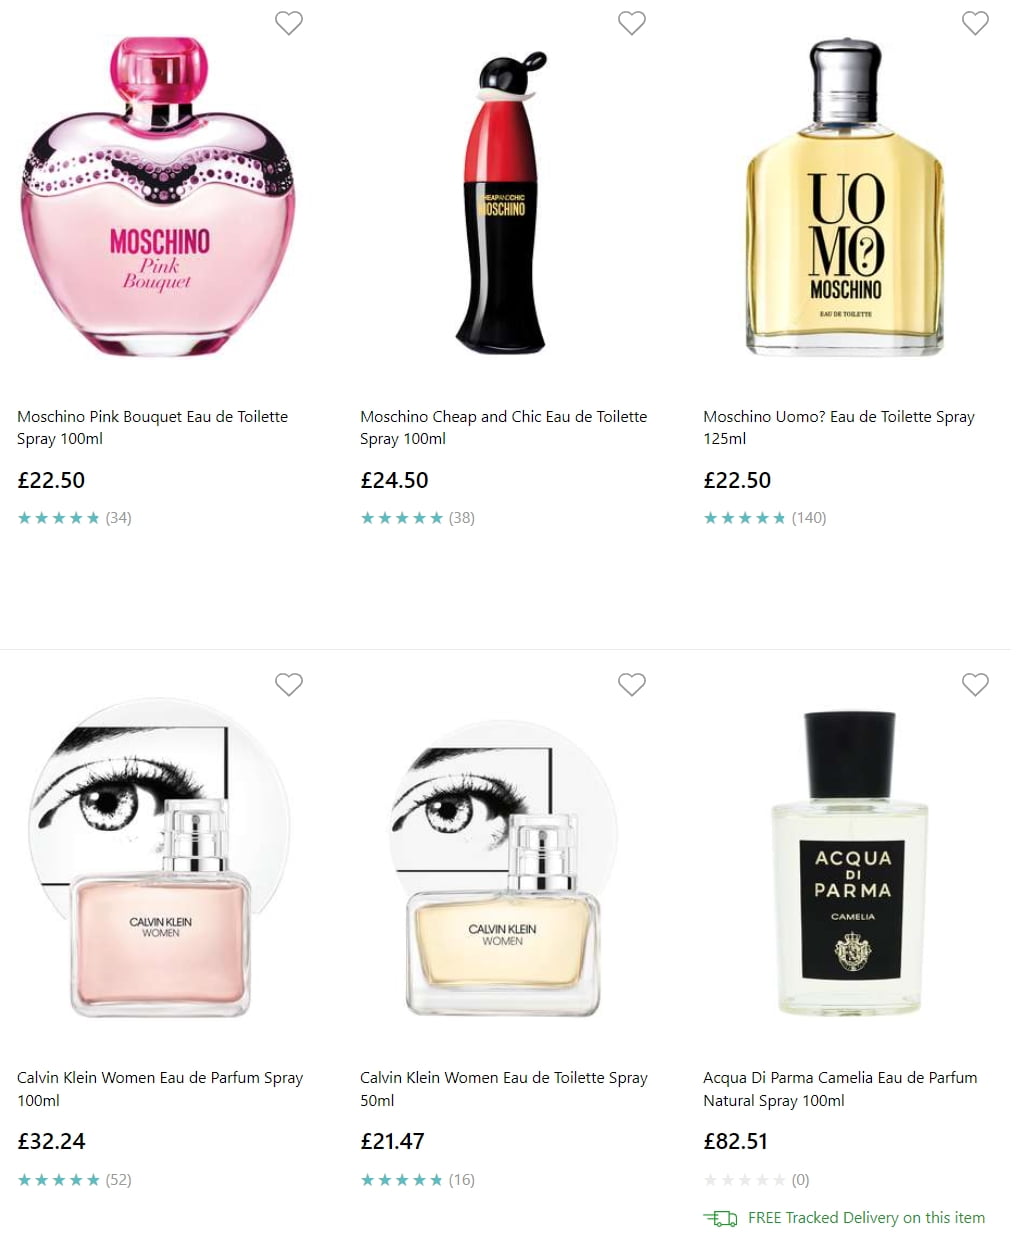 Offers at Allbeauty